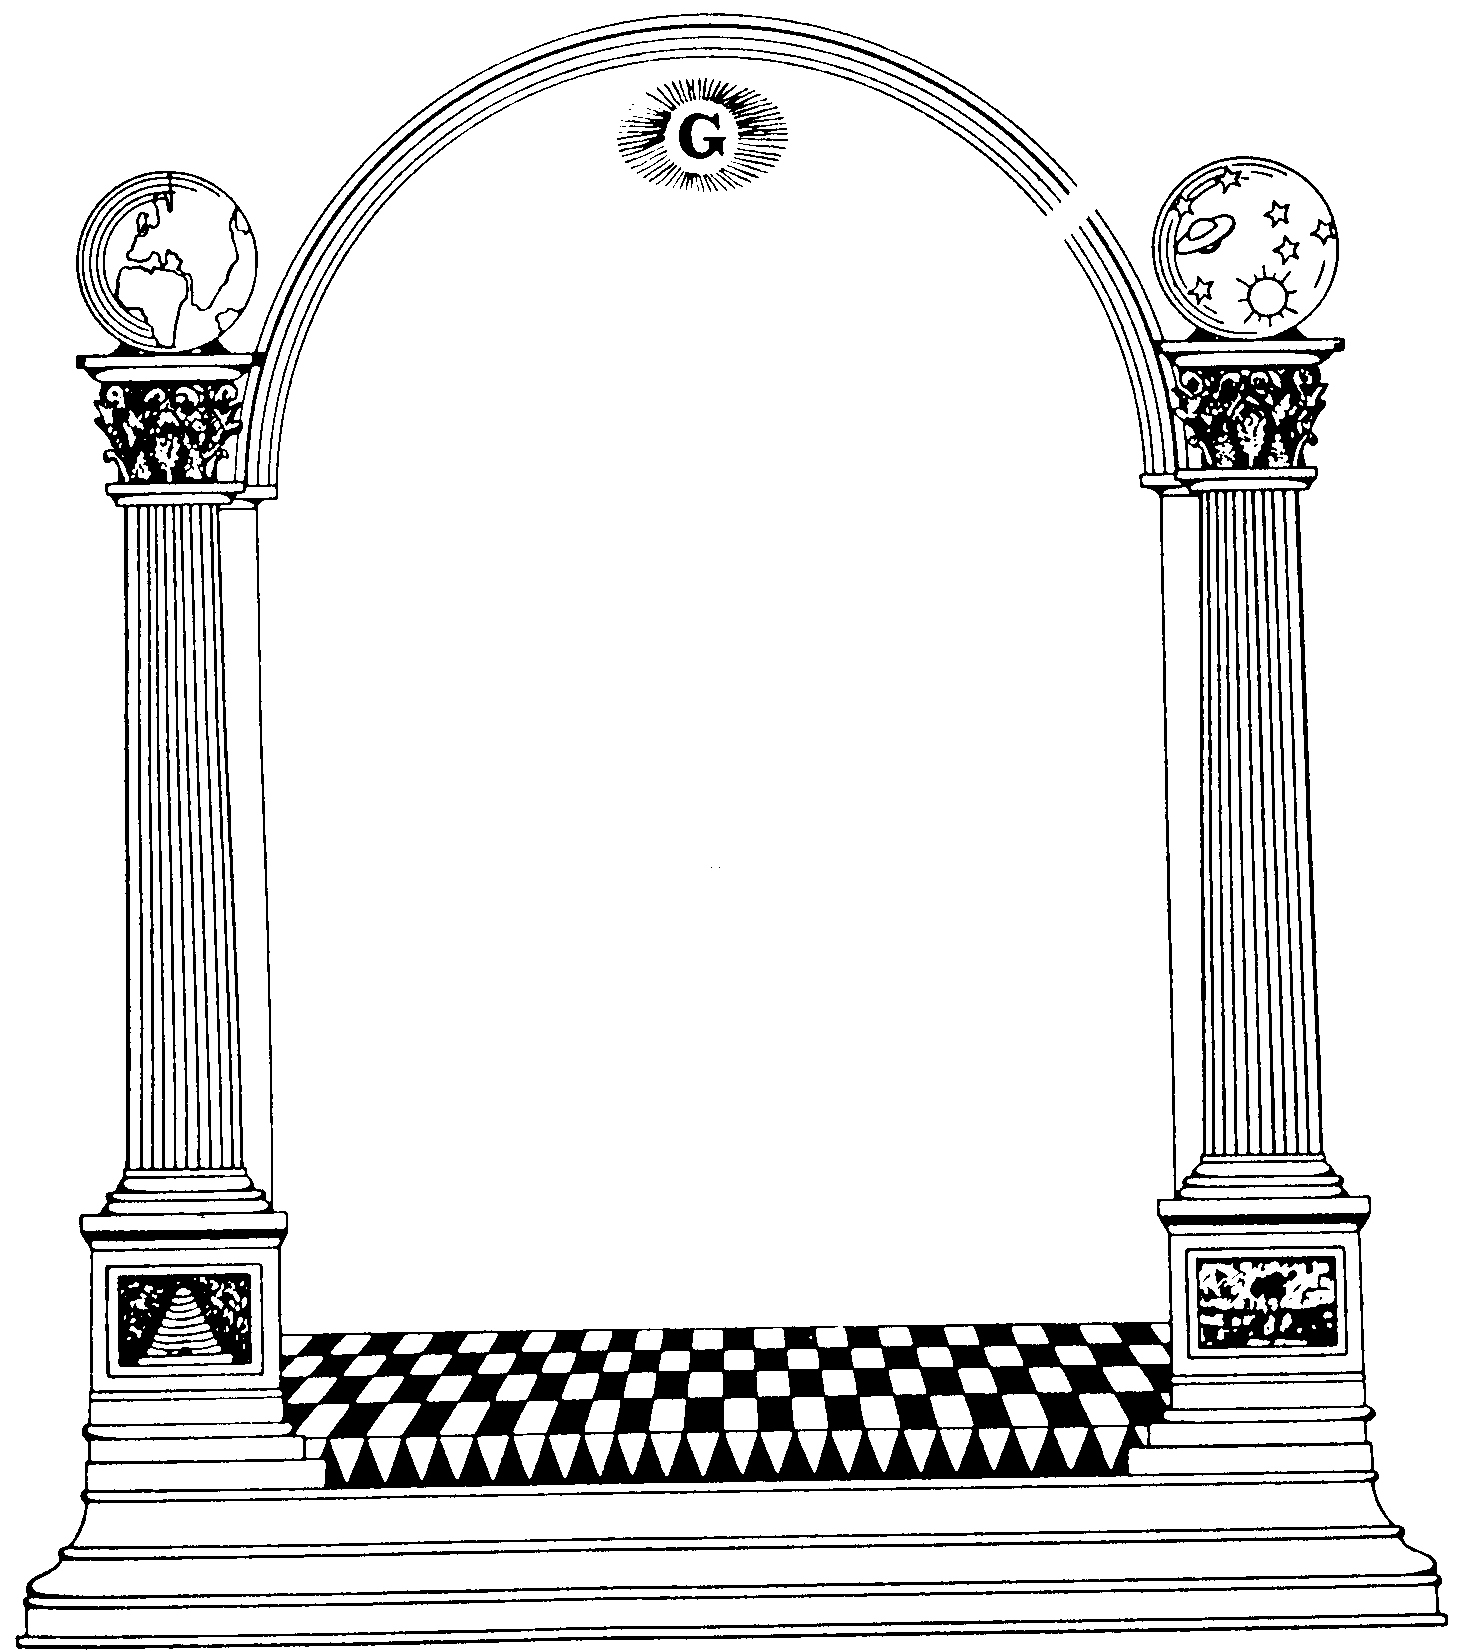 Masonic Clipart And Graphics   Blue Lodge   Page 1